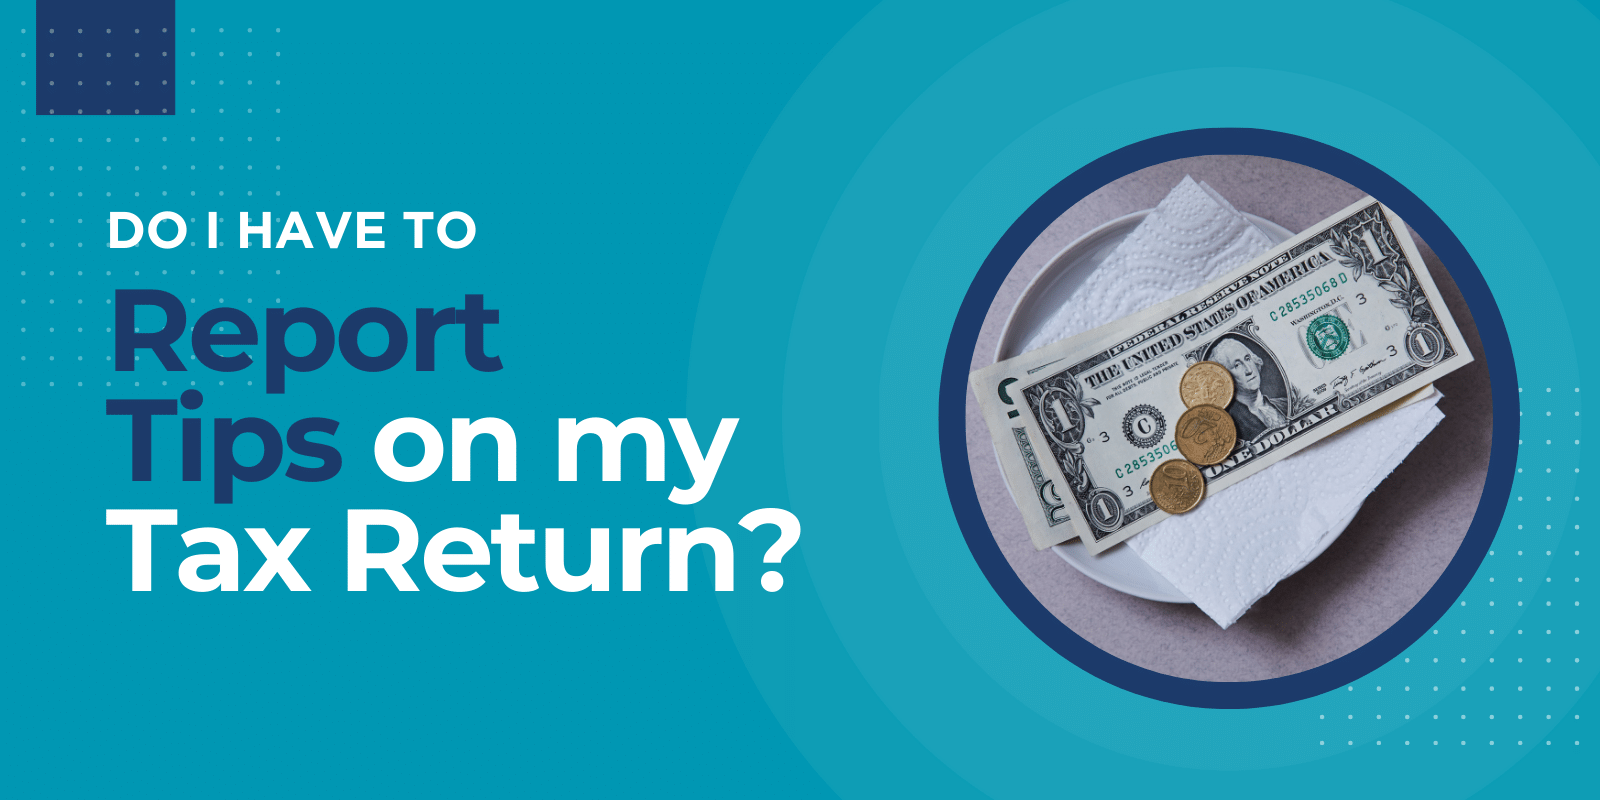 do i need to report tips on my tax return?